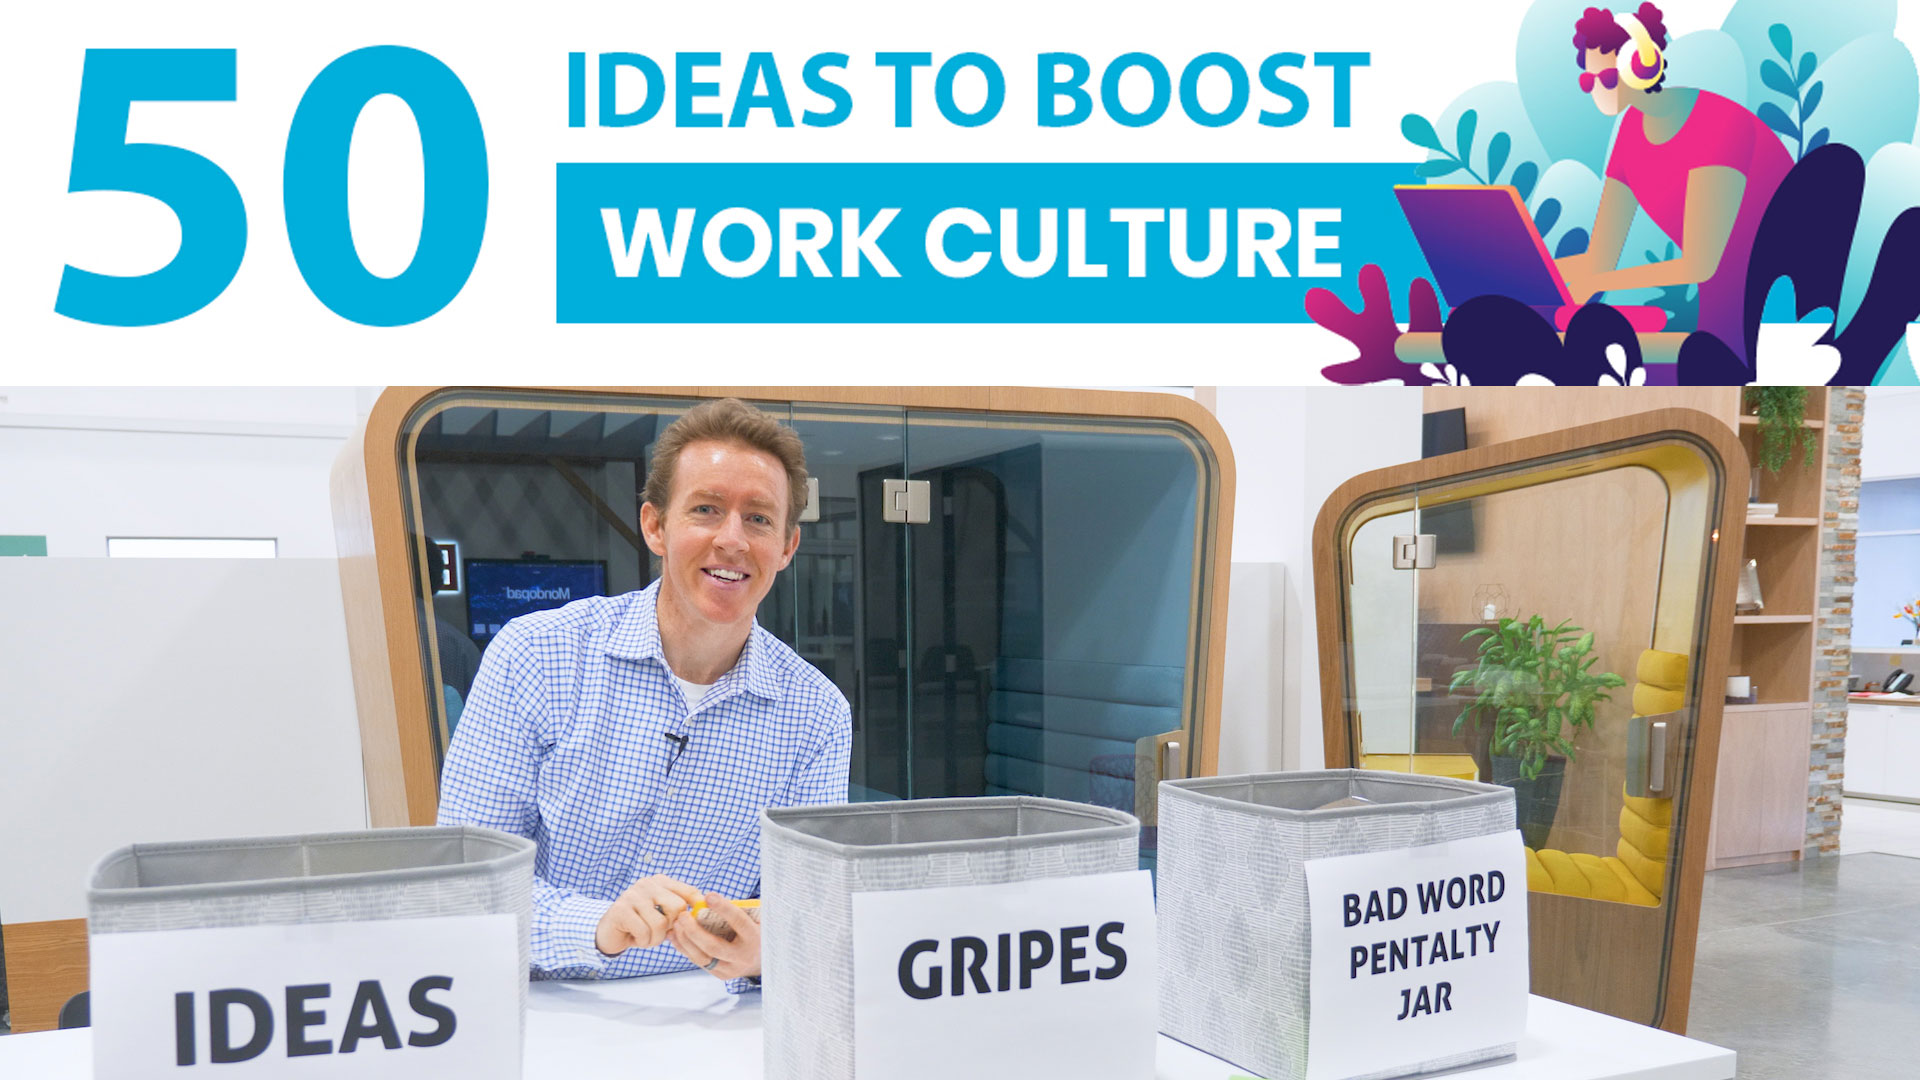 50 Ideas to Boost Work Culture